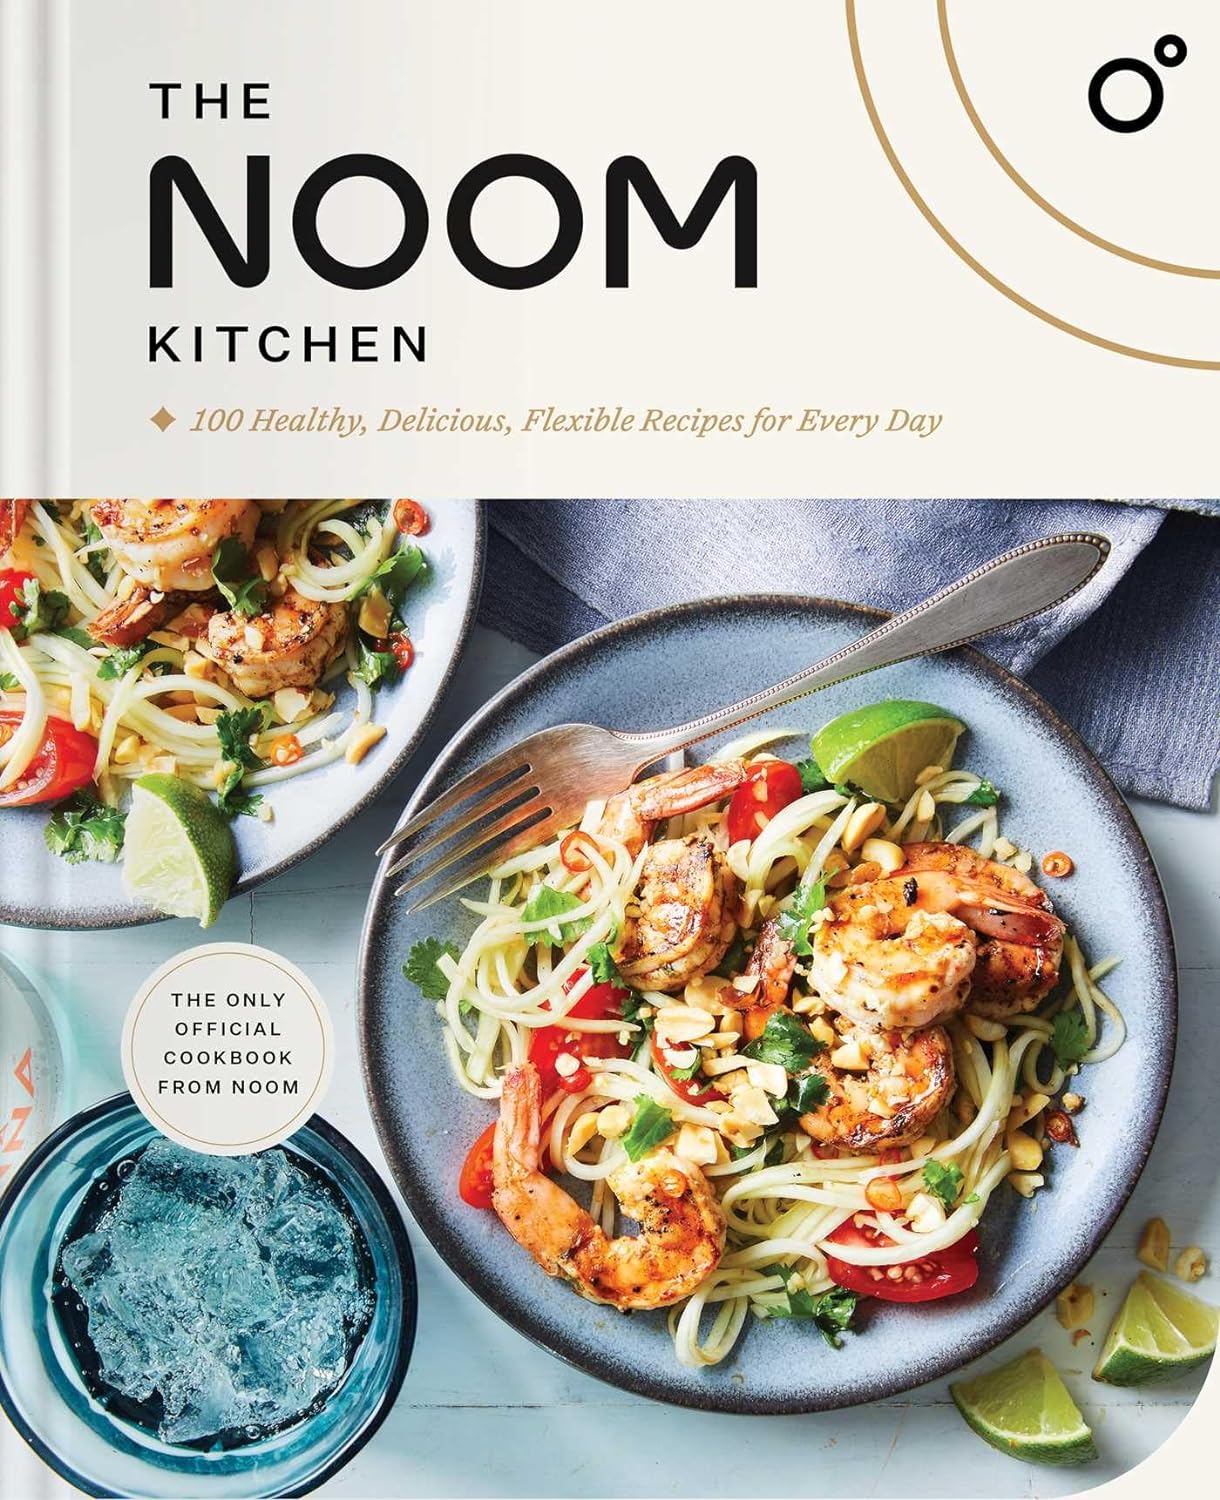 Image for "The Noom Kitchen"